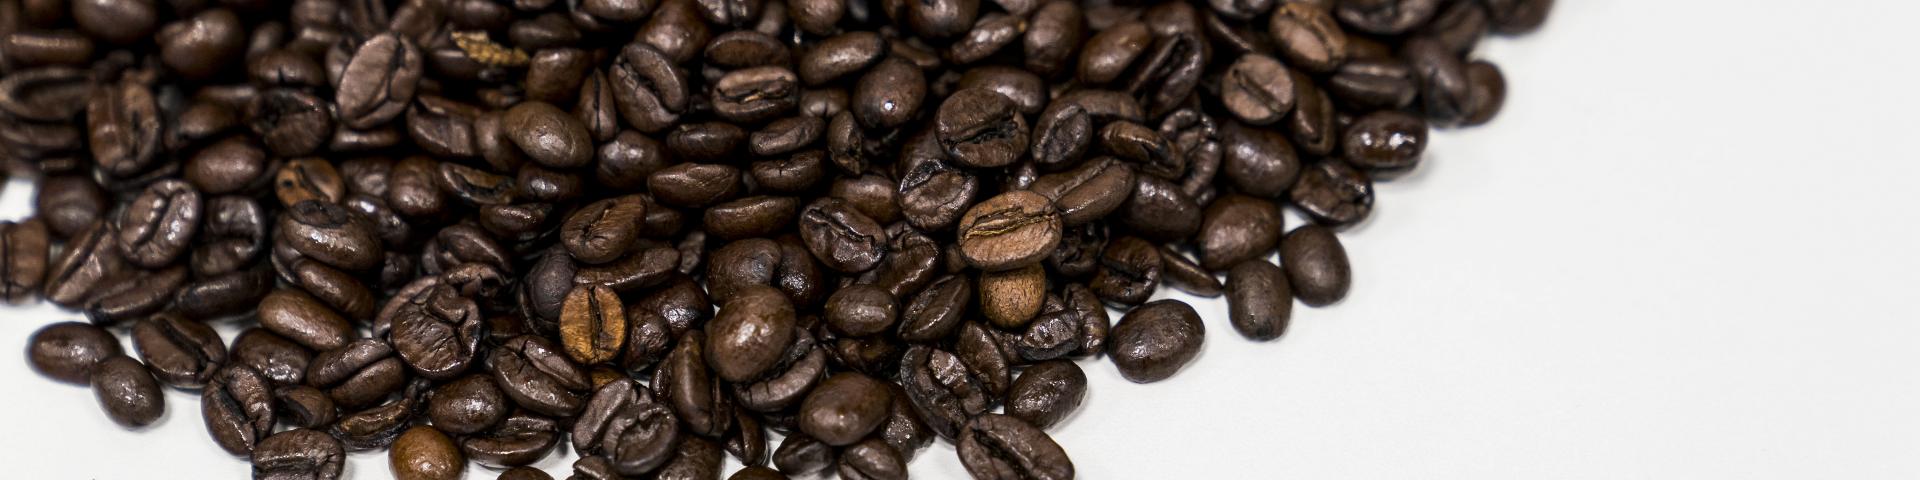 market potential for specialty coffee 